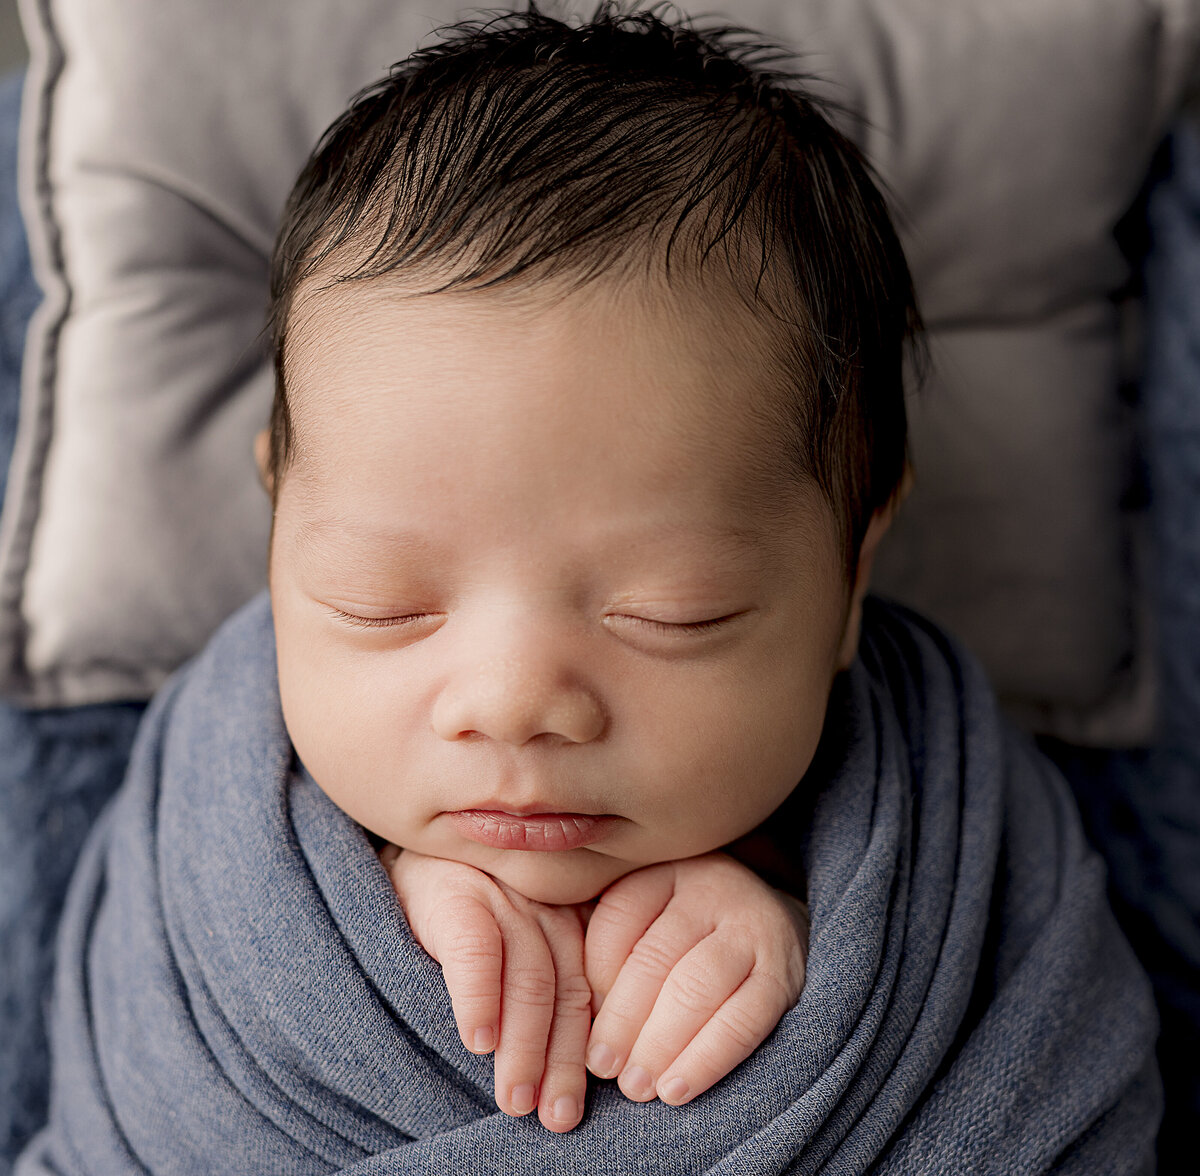 newborn baby face with hands grabbing on the wrap